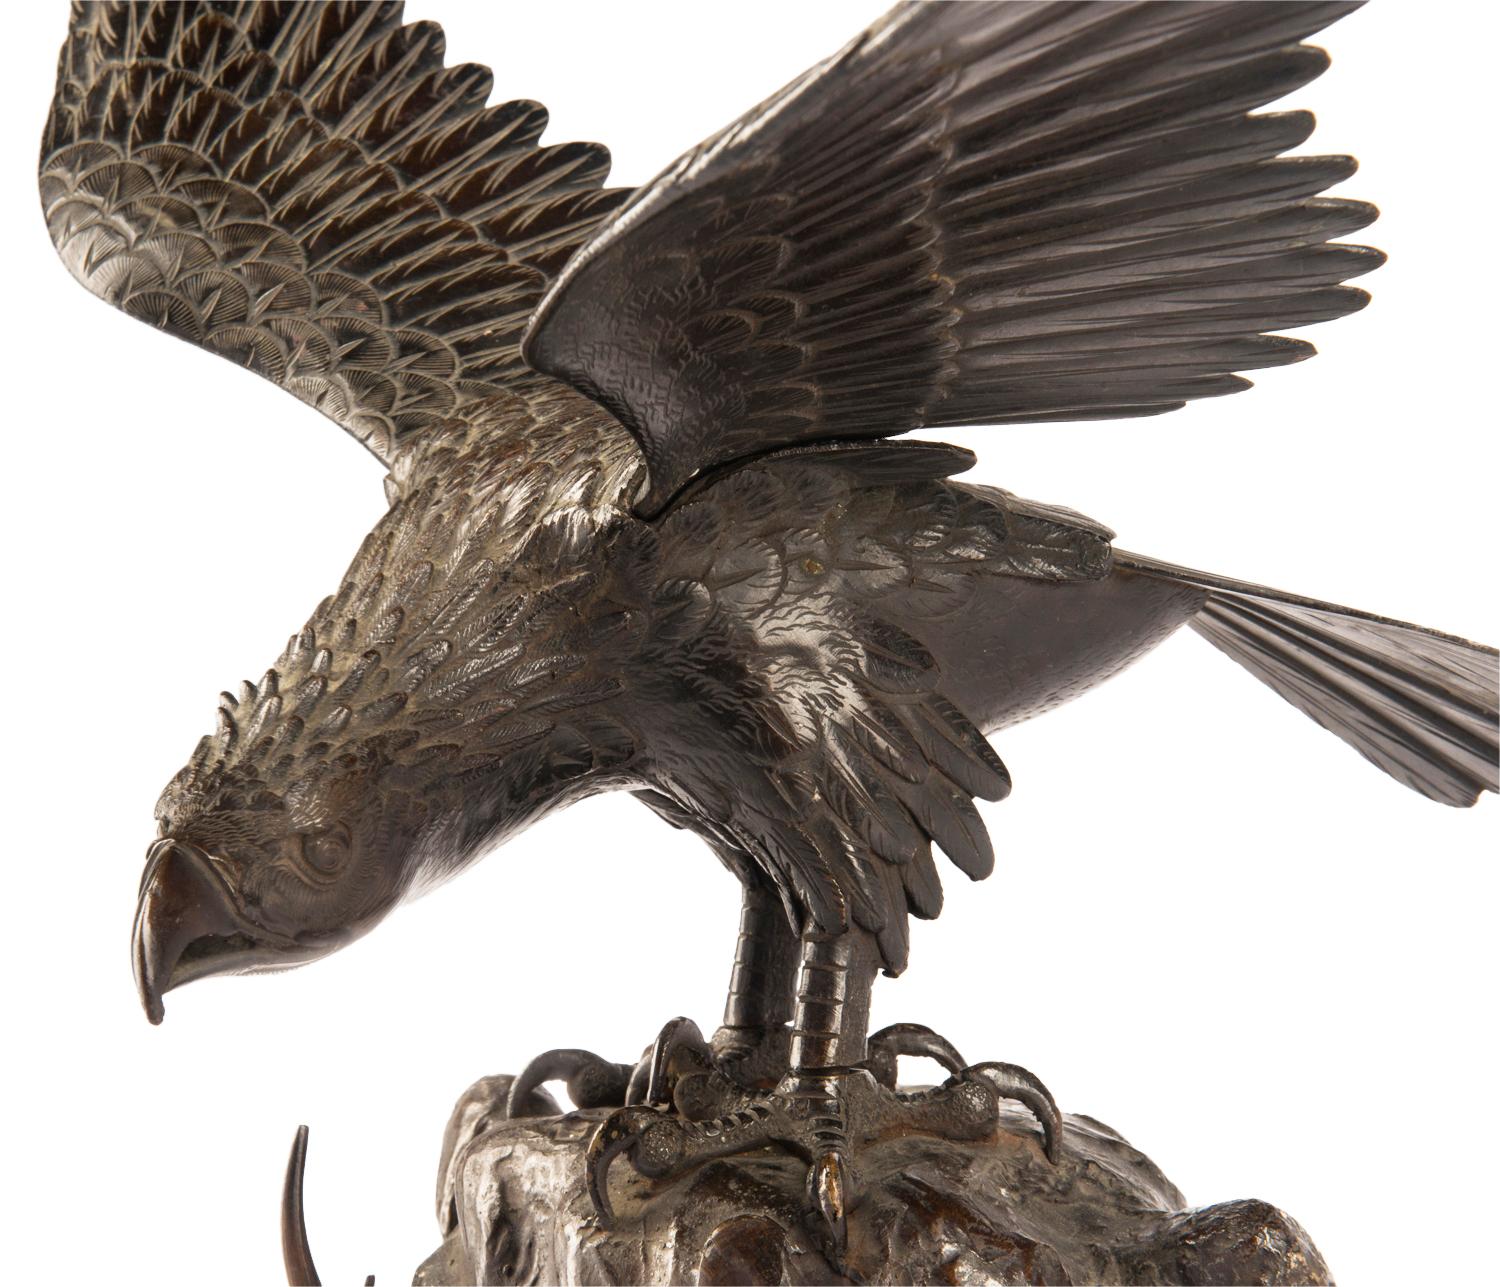 A very good quality Meiji period (1868-1912) Japanese bronze eagle mounted on a tree trunk.